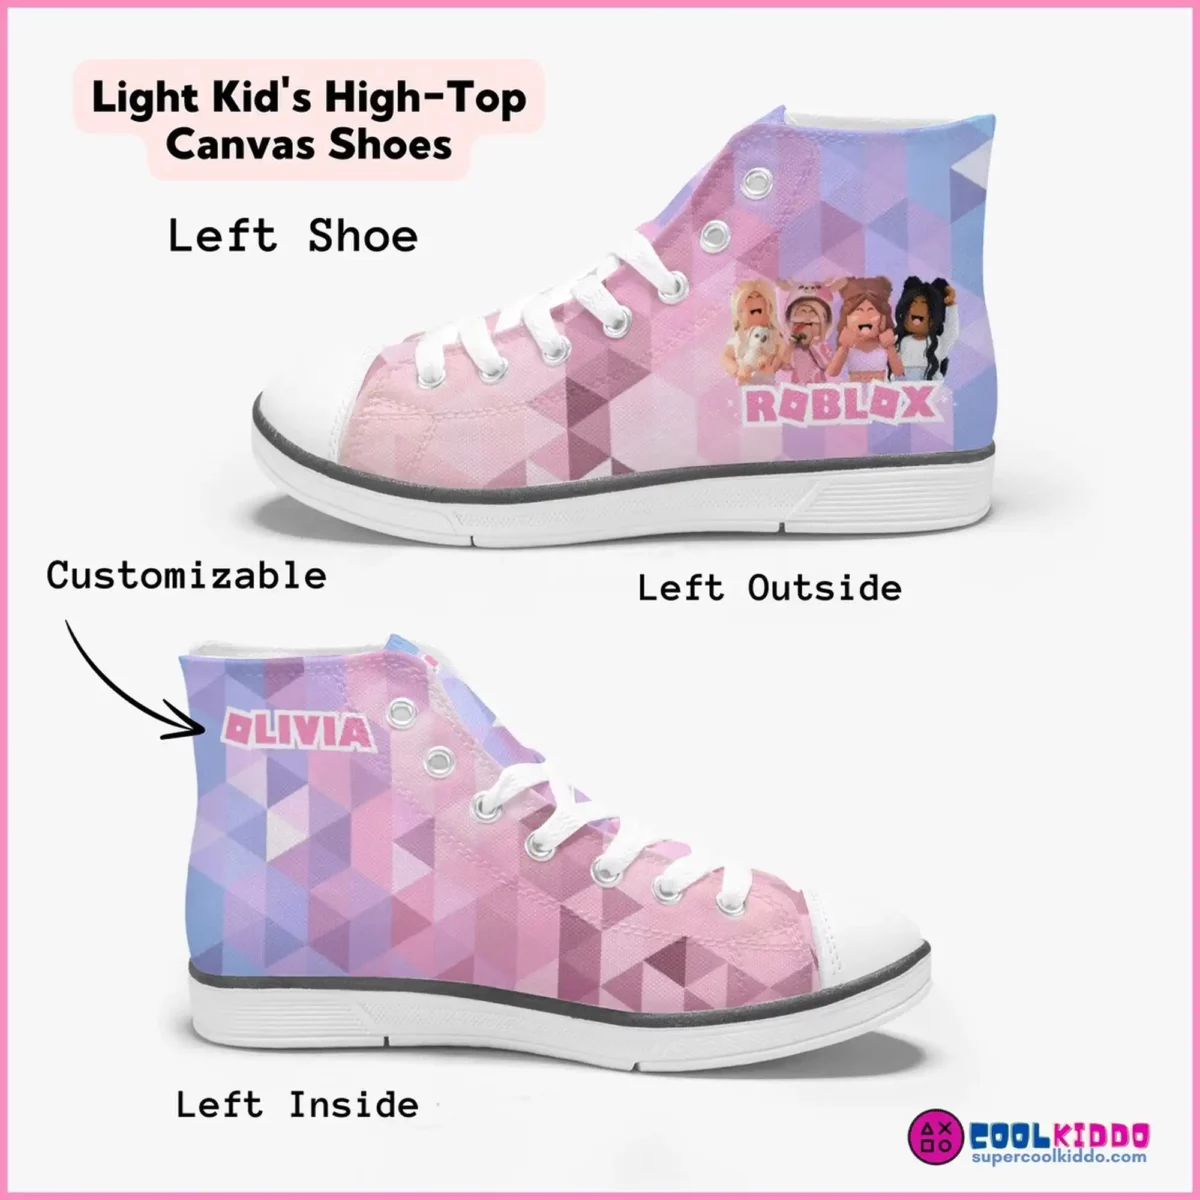 Roblox Girls Personalized High-Top Sneakers for Children – Pink and Purple geometric background Cool Kiddo 12